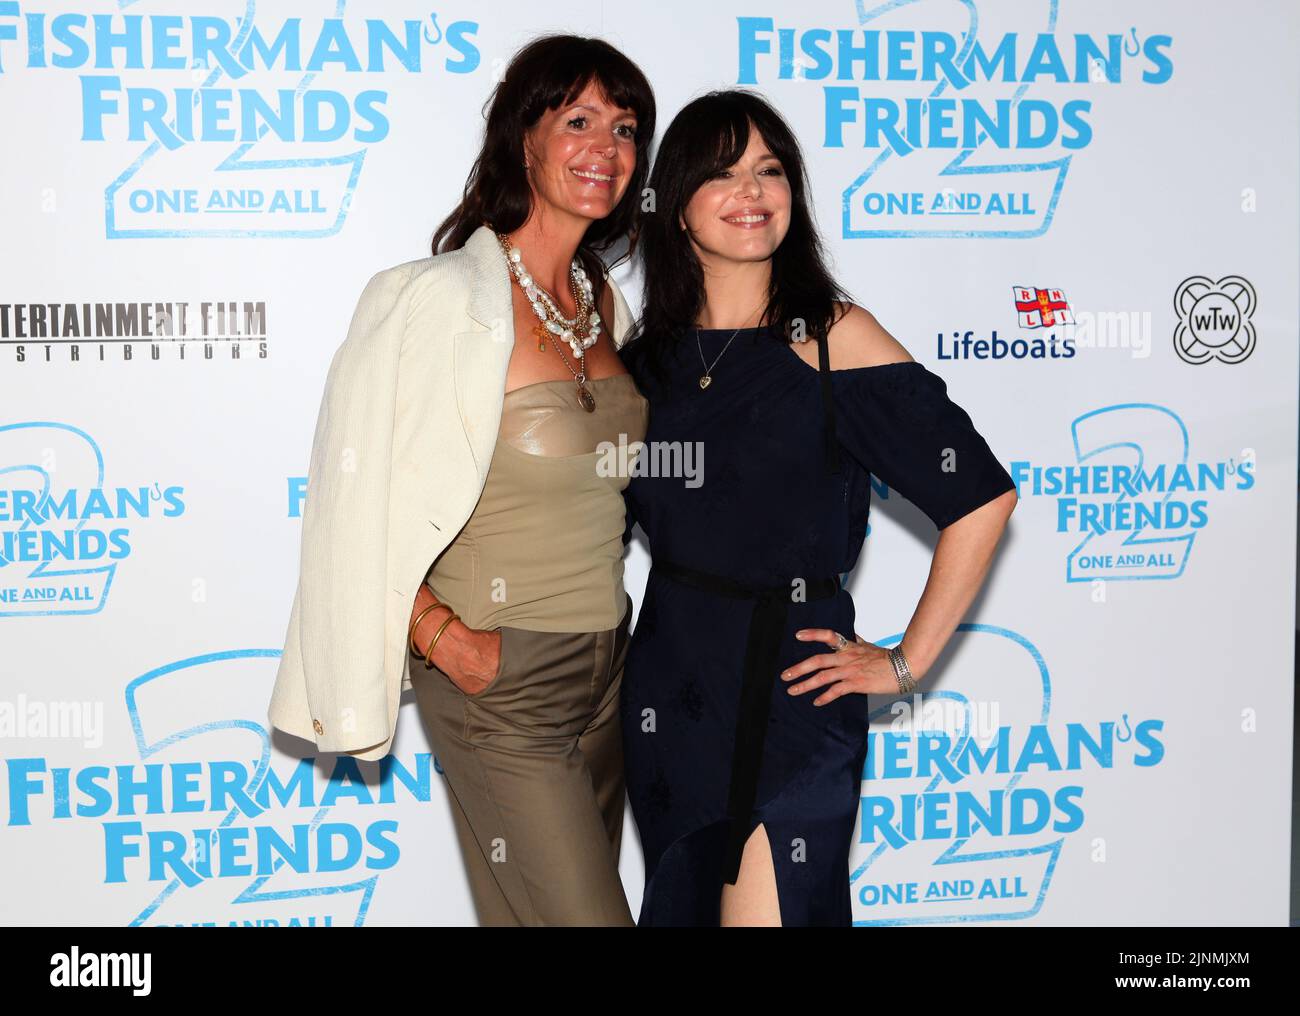 Newquay. Cornwall. UK. Meg Leonard and Imelda May    at the Fisherman's Friends: One and All premiere. Lighthouse Cinema. 9th August 2022. Ref:LMK11-SLIVE090822-001 Steve Bealing/Landmark Media. Stock Photo